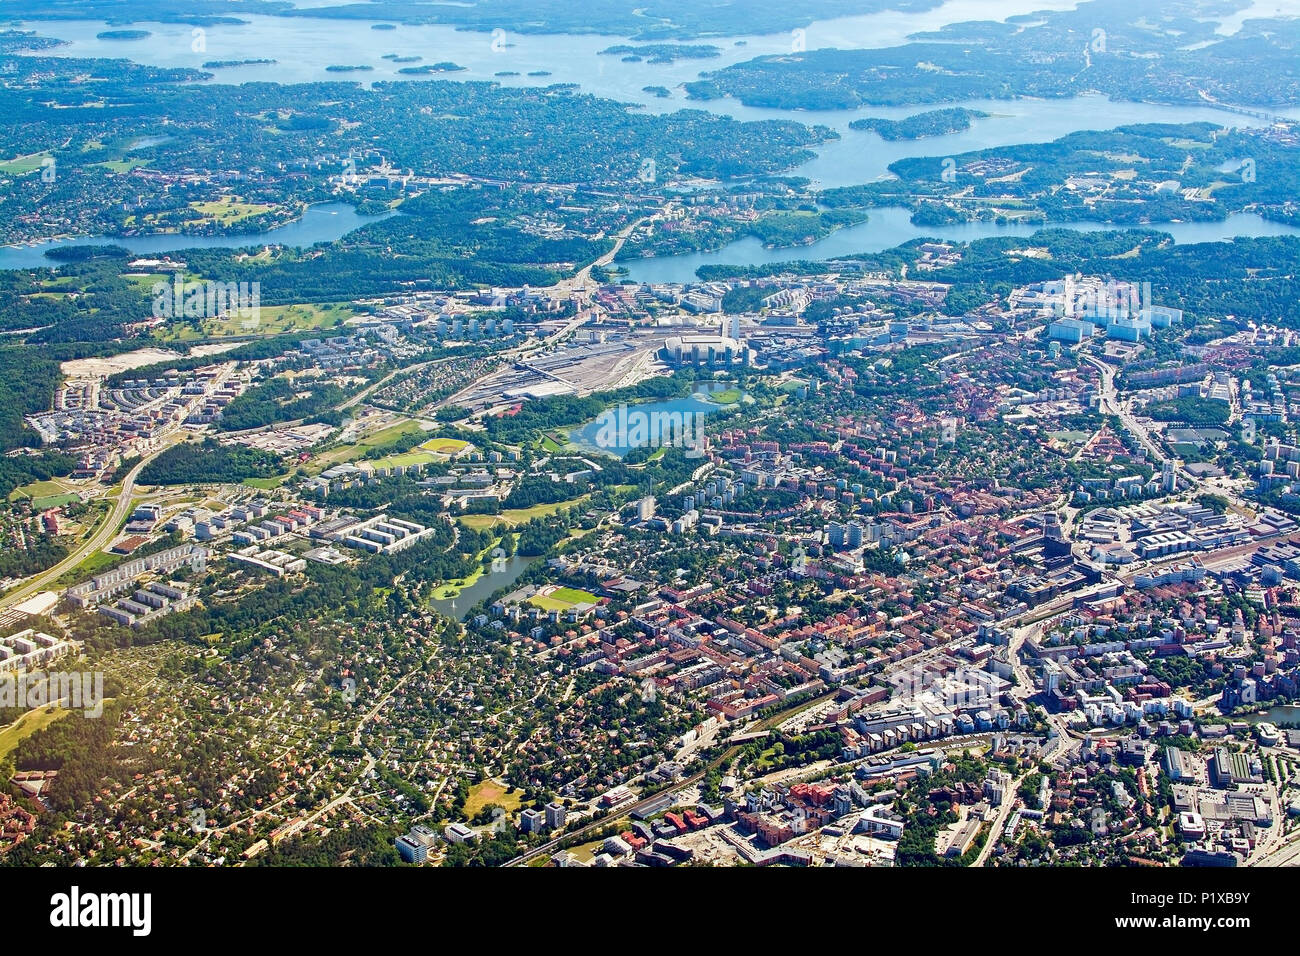 STOCKHOLM, SWEDEN - JUNE 1, 2018: Aerial shot over Solna Sundbyberg Stockholm during inflight to Arlanda airport on a sunny day on June 1, 20108 in St Stock Photo